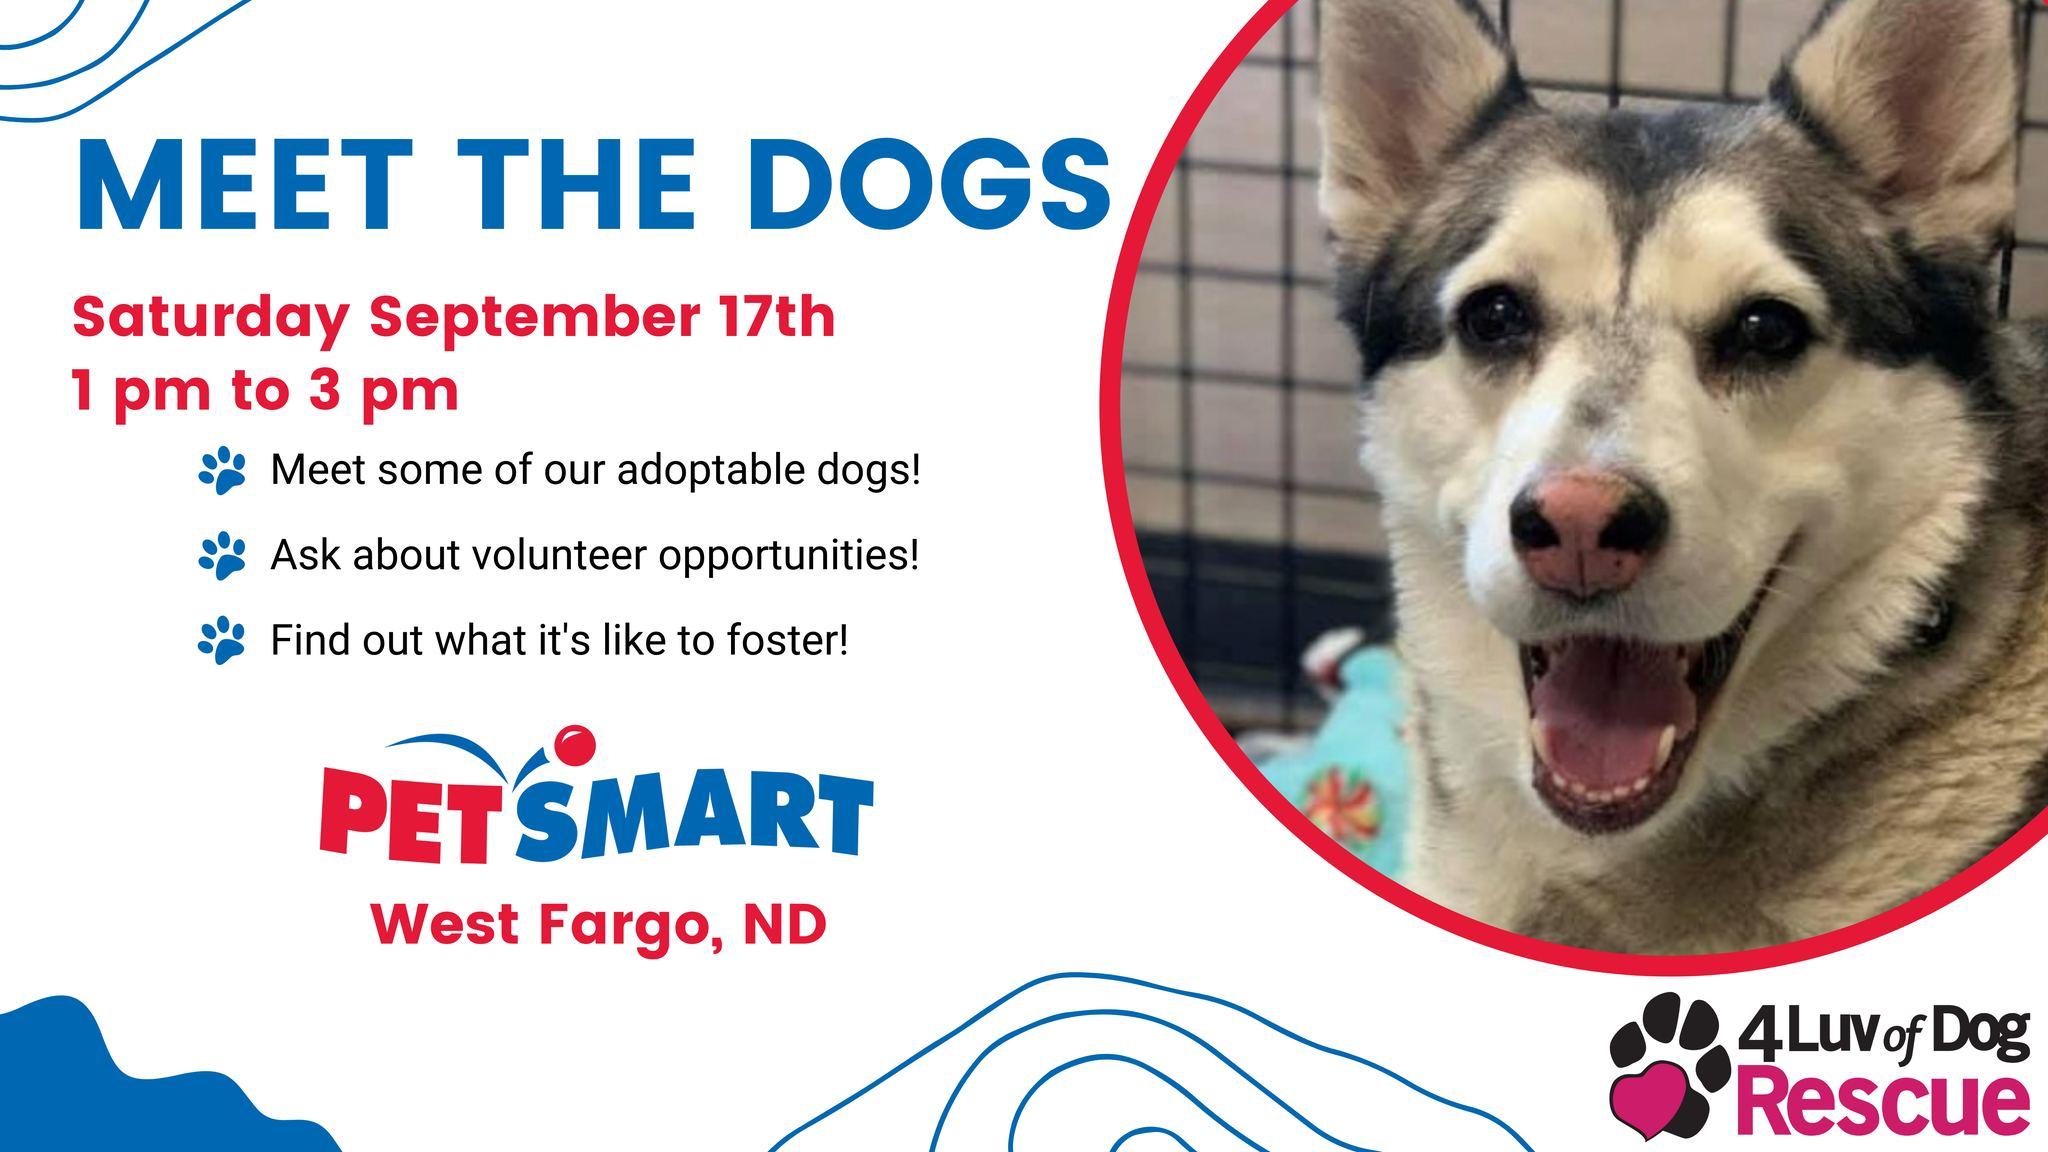 4 Luv of Dog Rescue Meet the Dogs Event - September 17, 2022